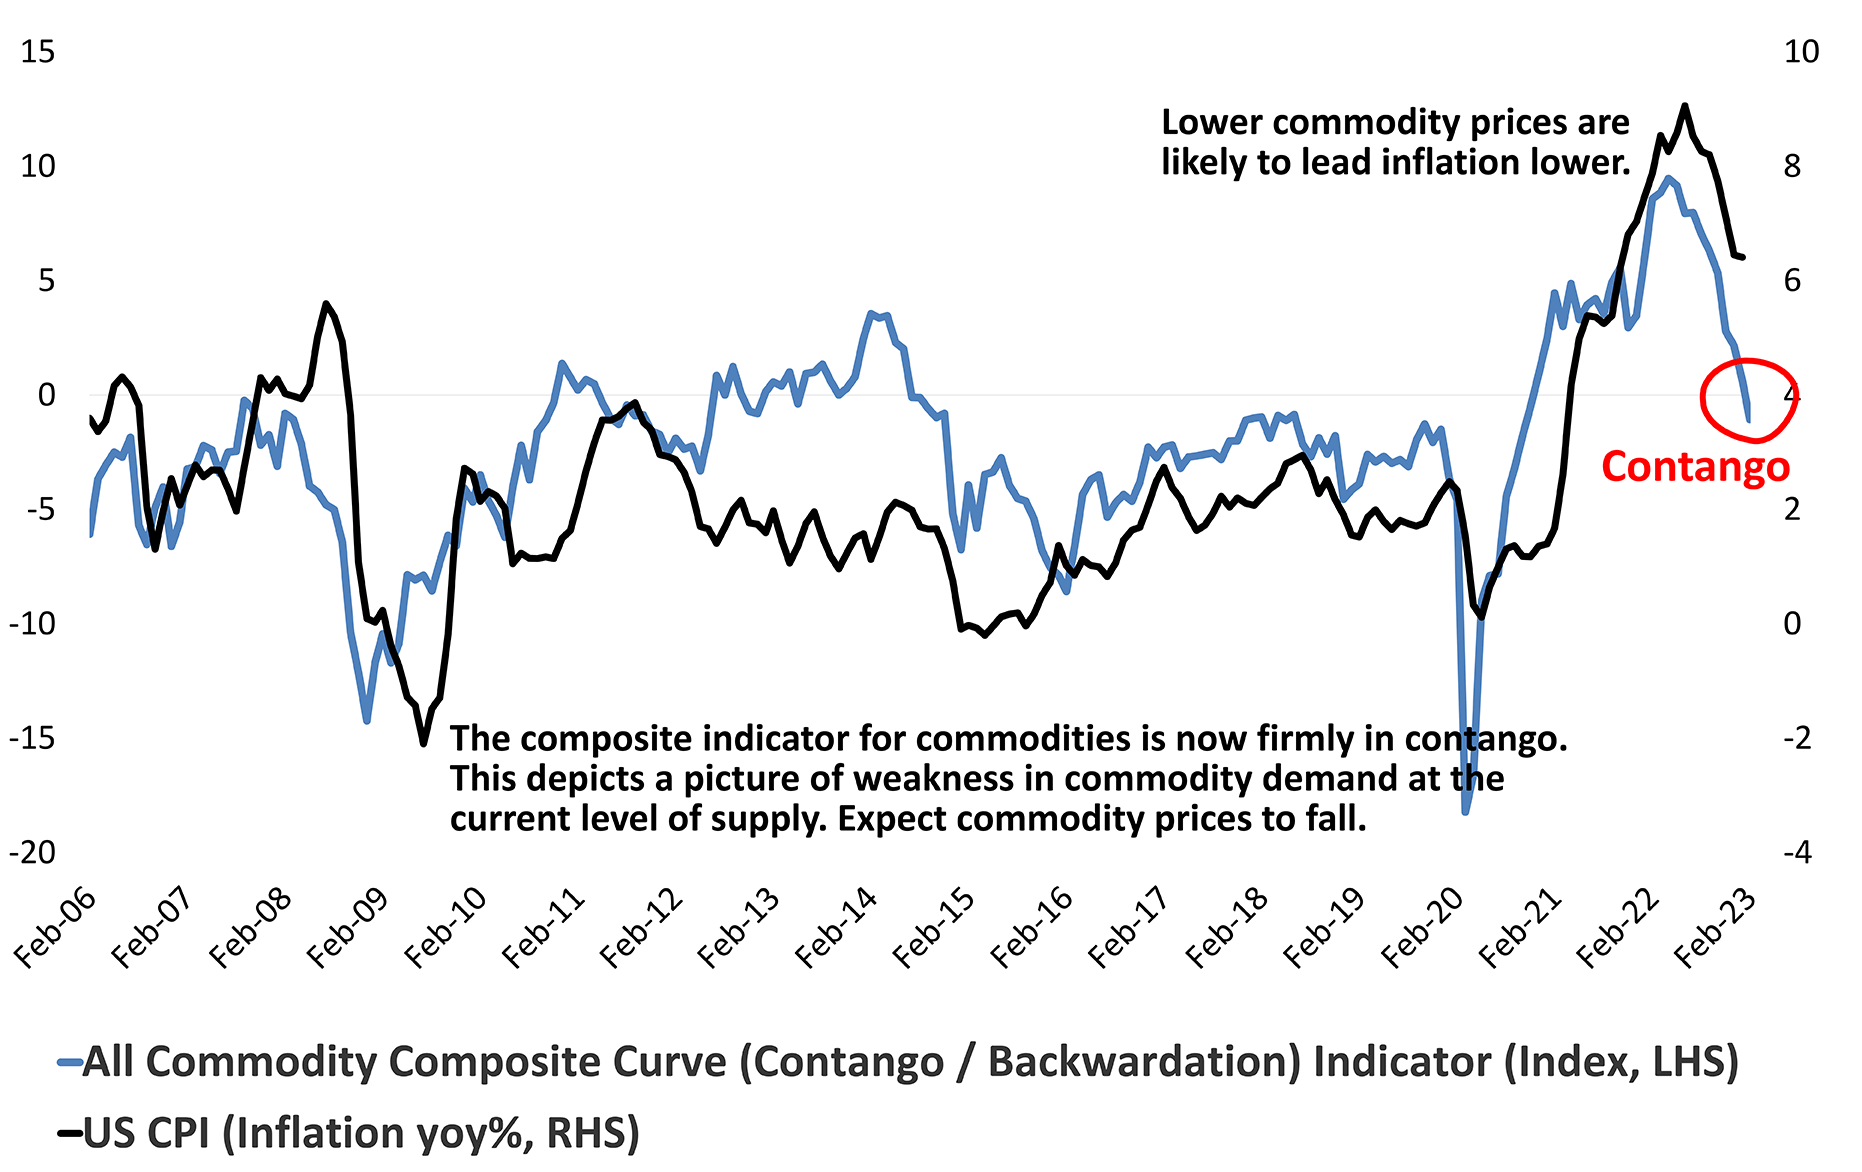 Commodity Curves Signal Inflation Deceleration